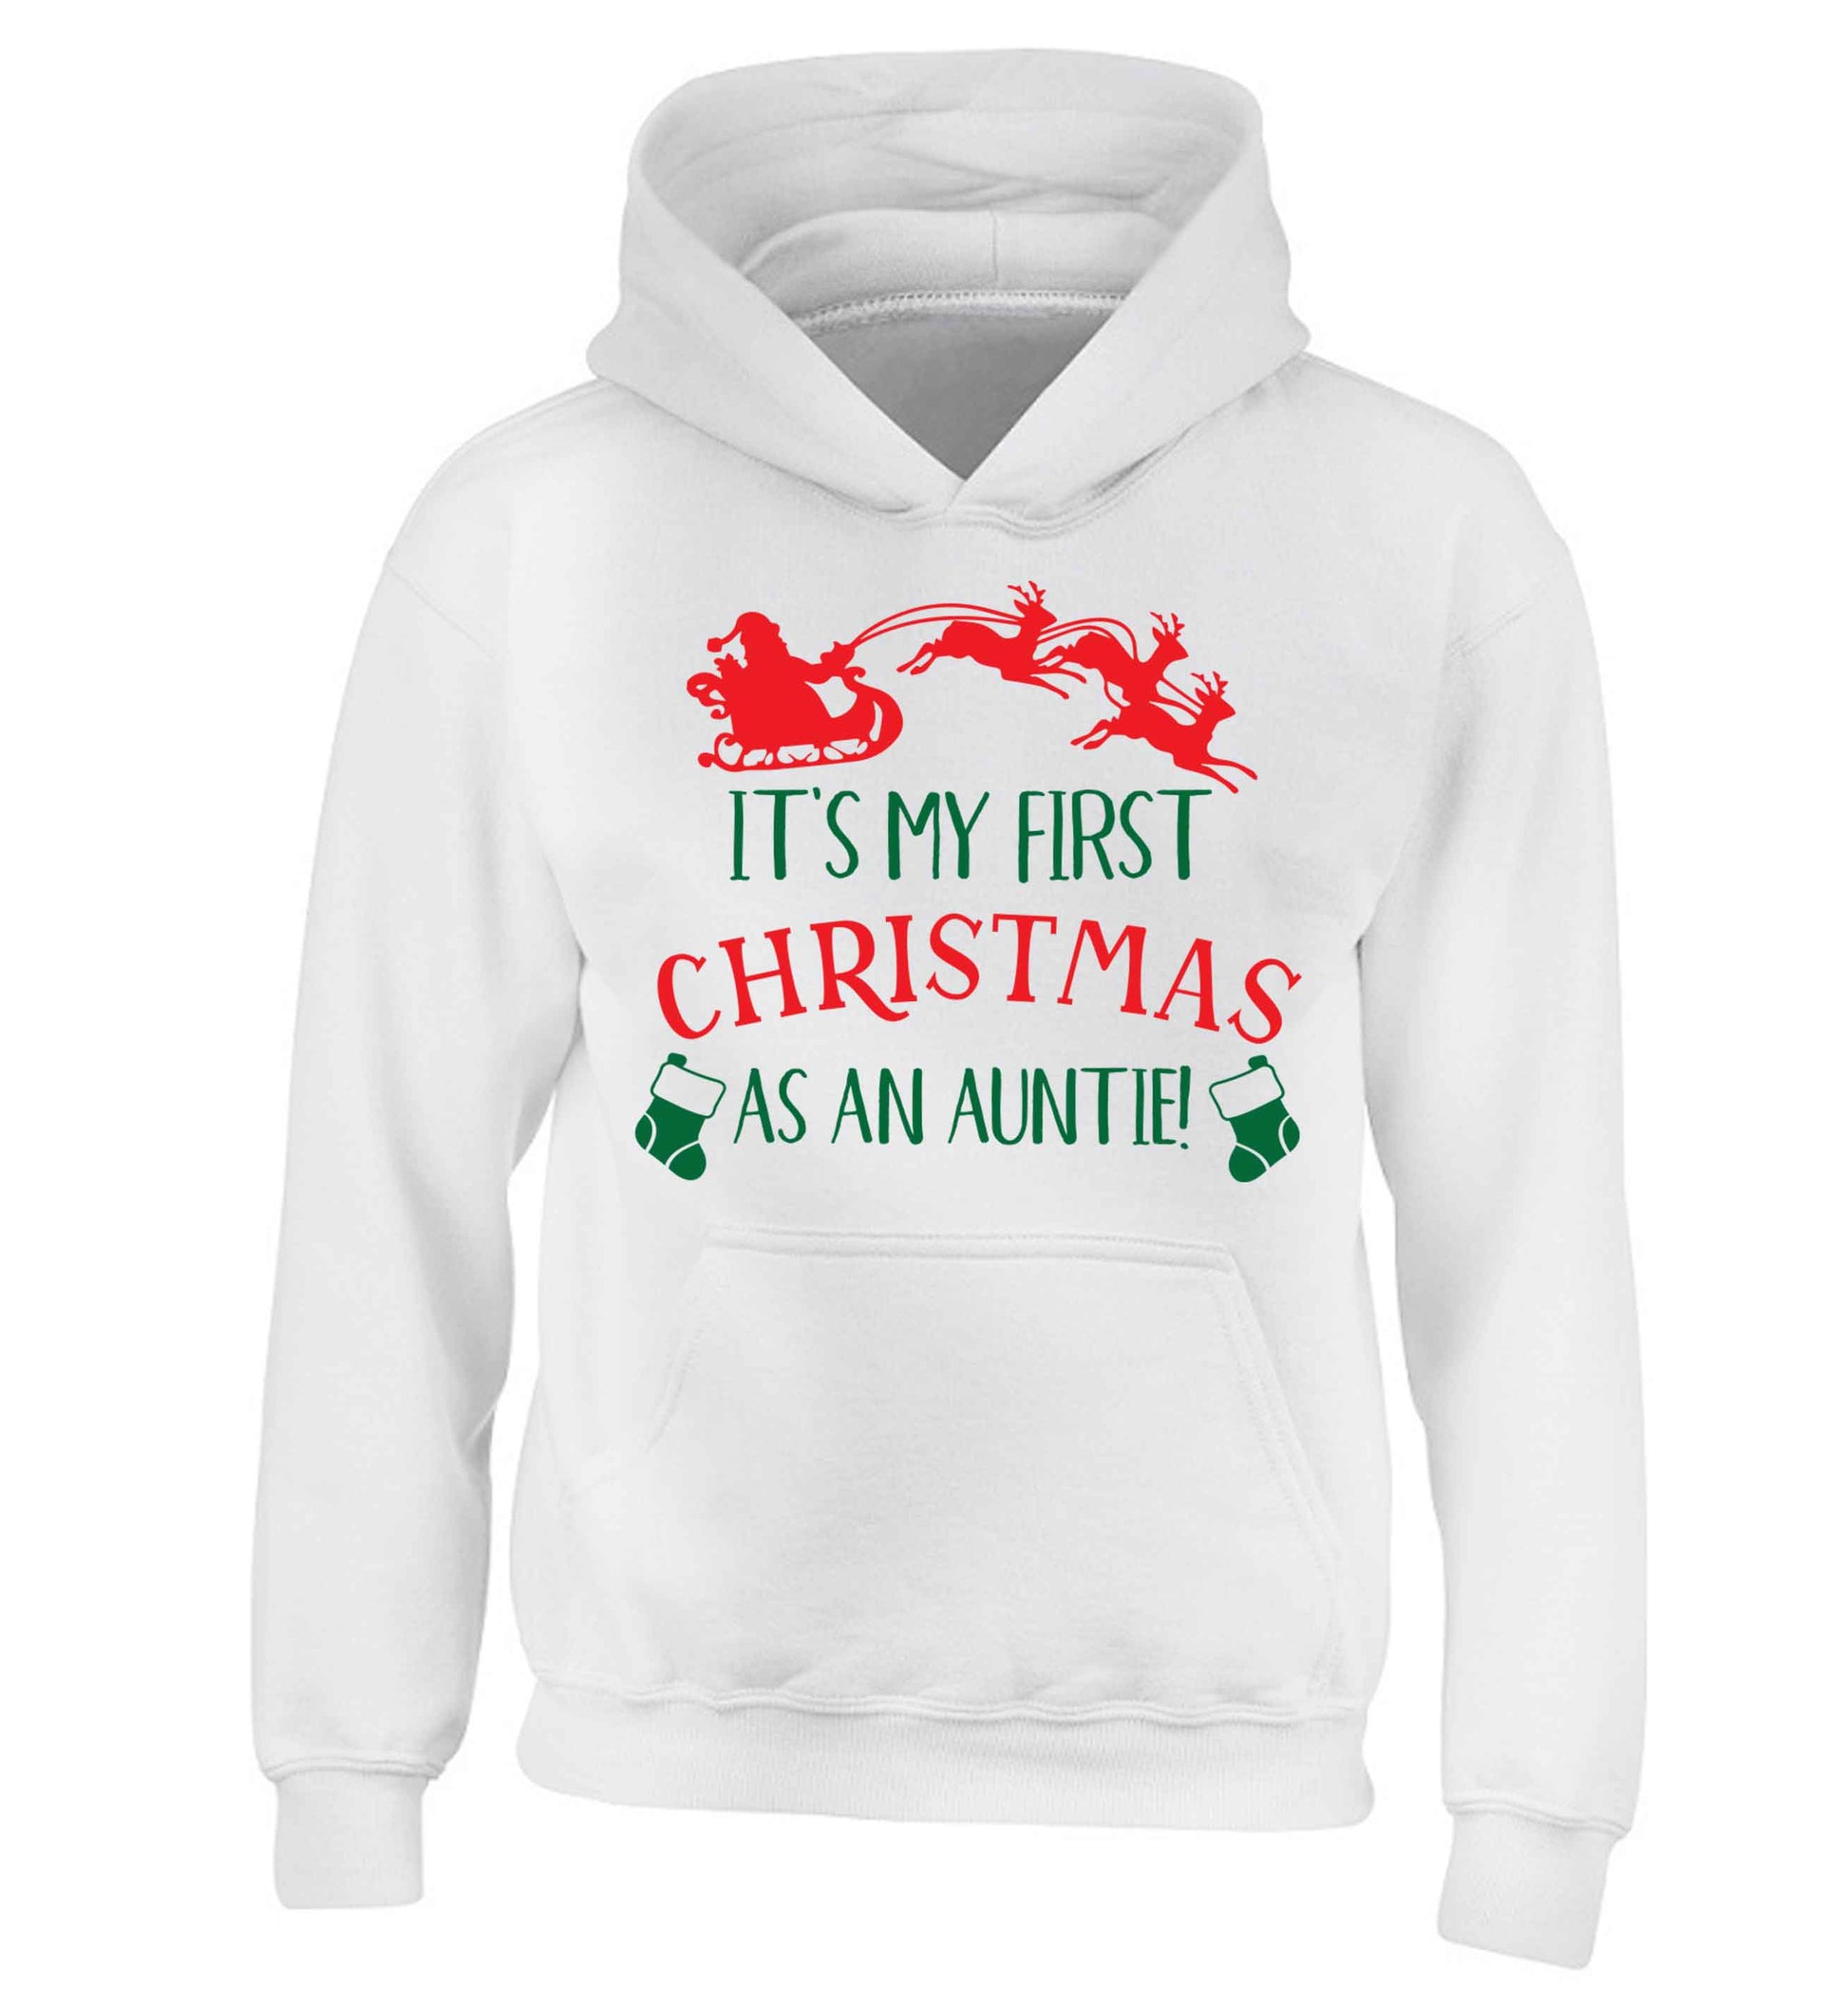 It's my first Christmas as an auntie! children's white hoodie 12-13 Years